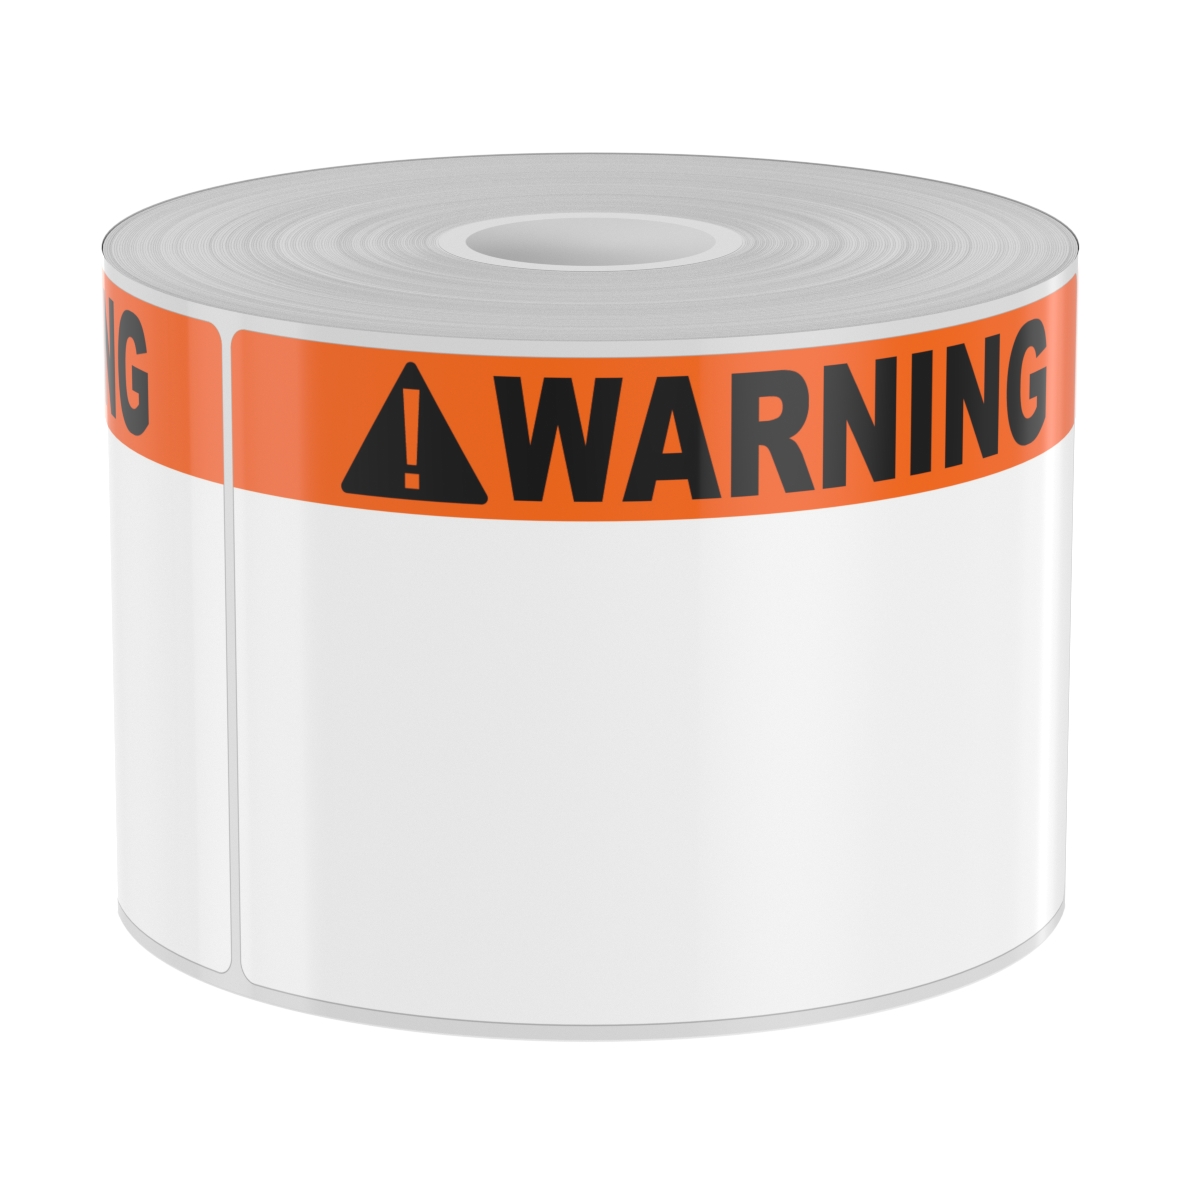 Ask a question about 250 3" x 5" High-Performance Orange Band with Black Warning